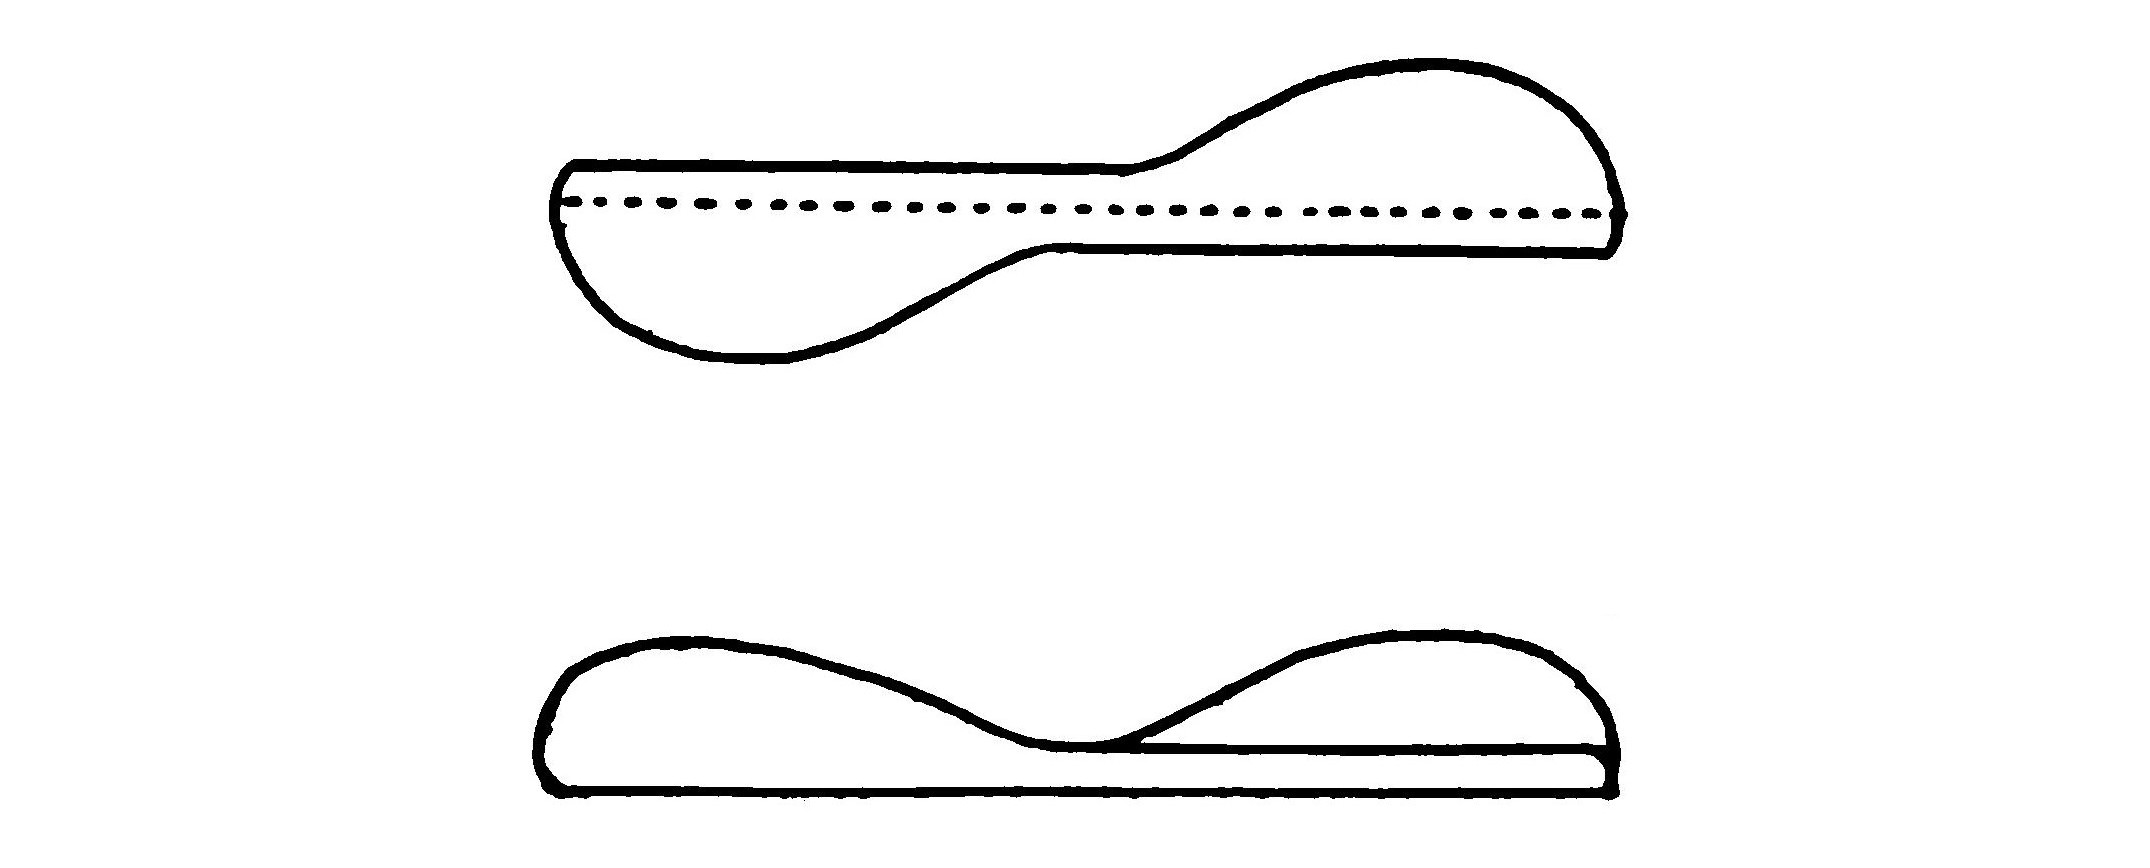 FIG. 29. A simple method of forming a propeller from sheet metal.